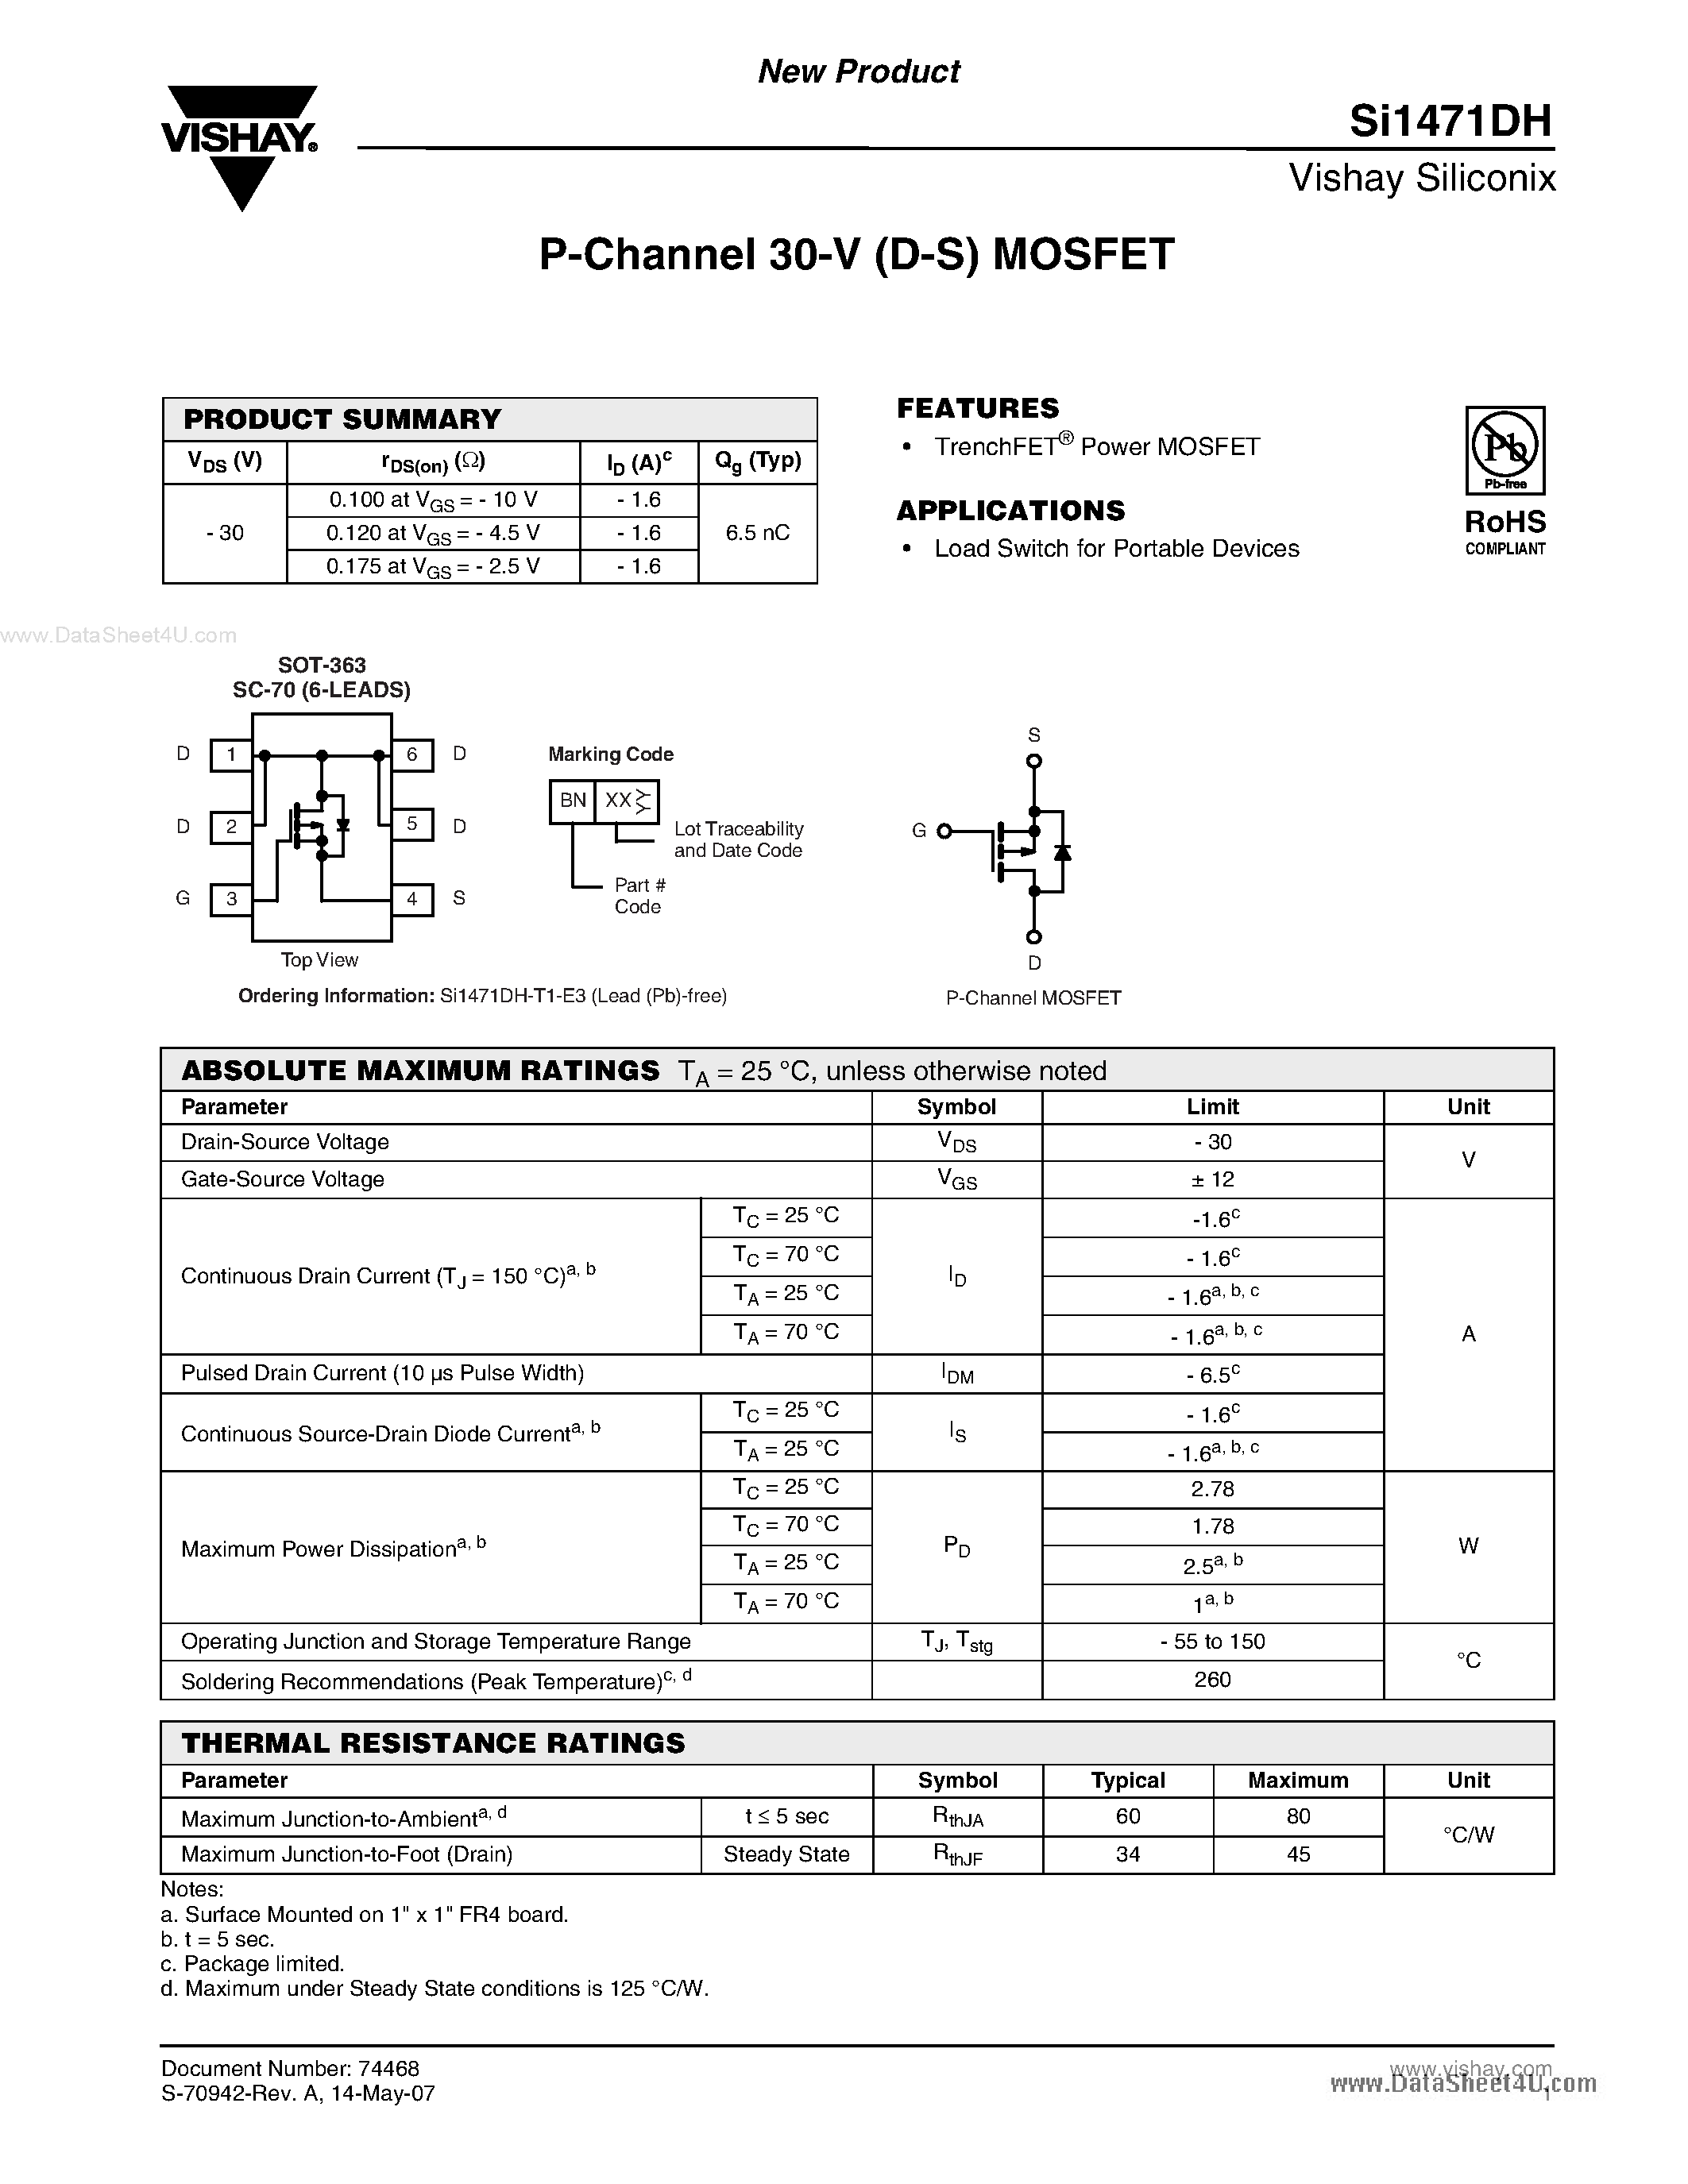 Datasheet SI1471DH - P-Channel MOSFET page 1